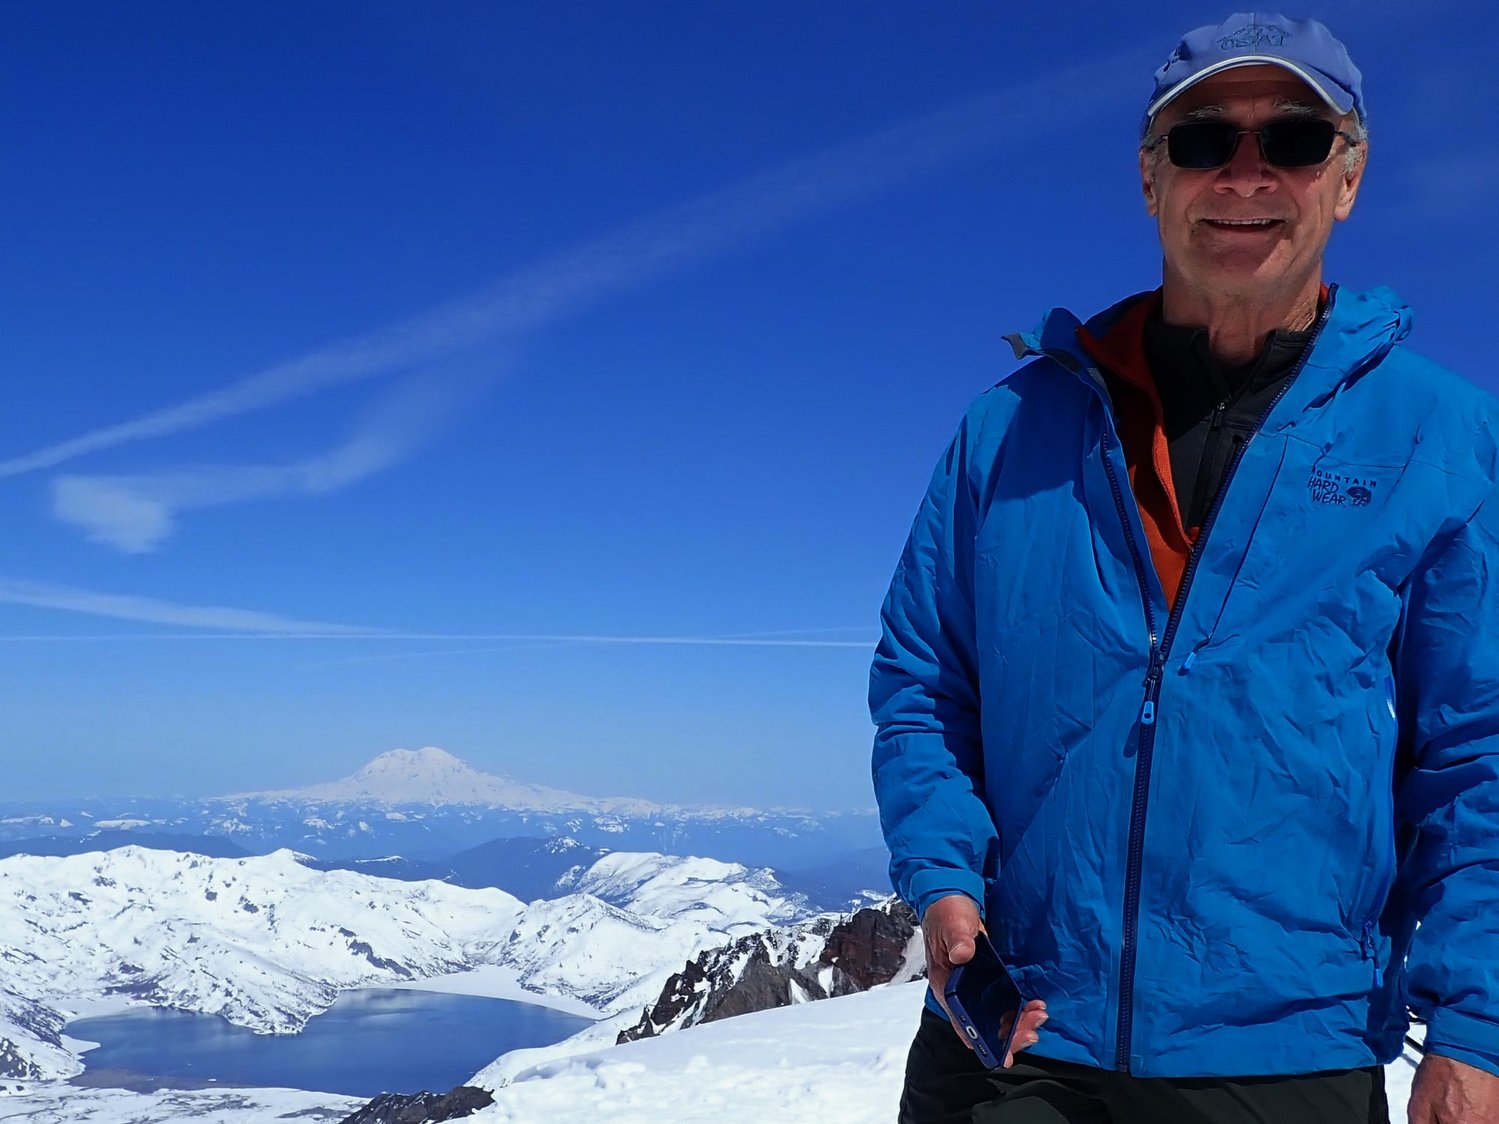 Centralia resident Neal Kirby poses for a photograph after reaching the summit of Mount St. Helens on March 31. In addition to being a longtime educator and principal in Lewis County, Kirby is the chairman of the Olympia Branch of Mountaineers.